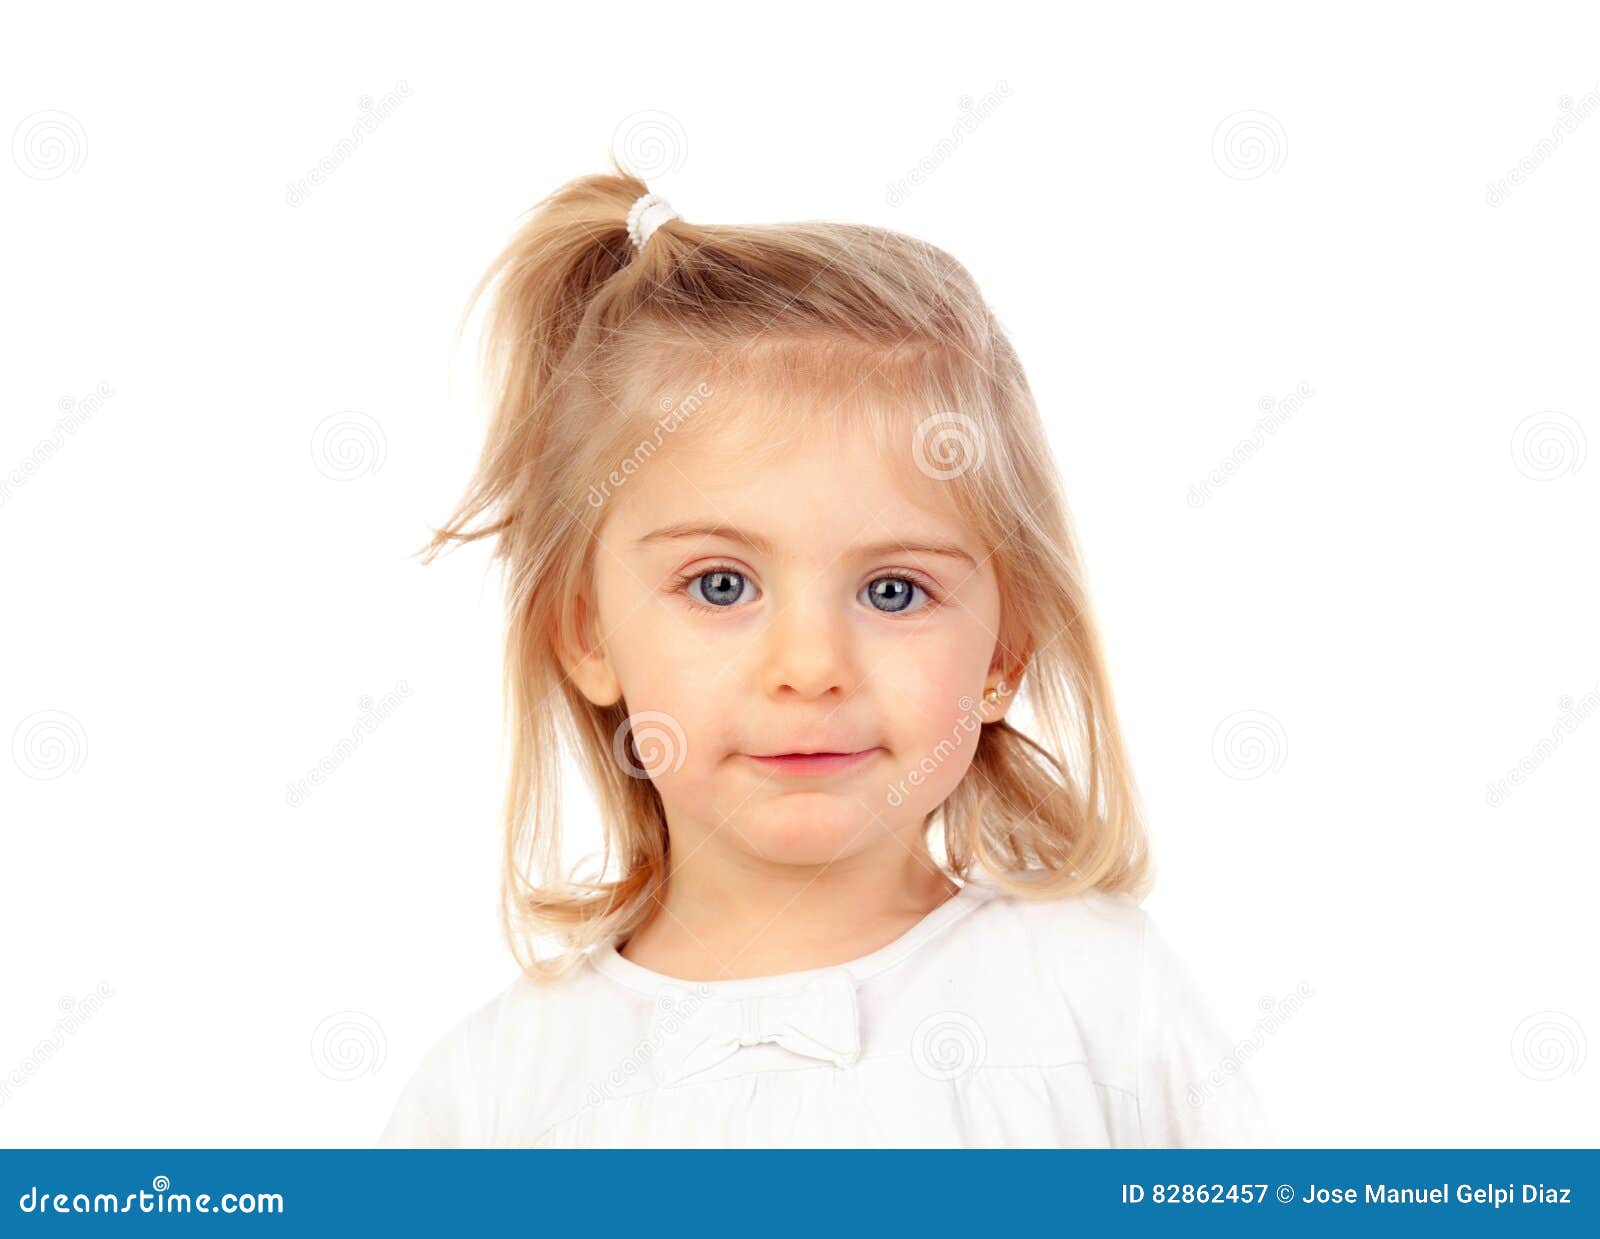 Pretty Blonde Baby Girl With Blue Eyes Stock Image Image Of Girl